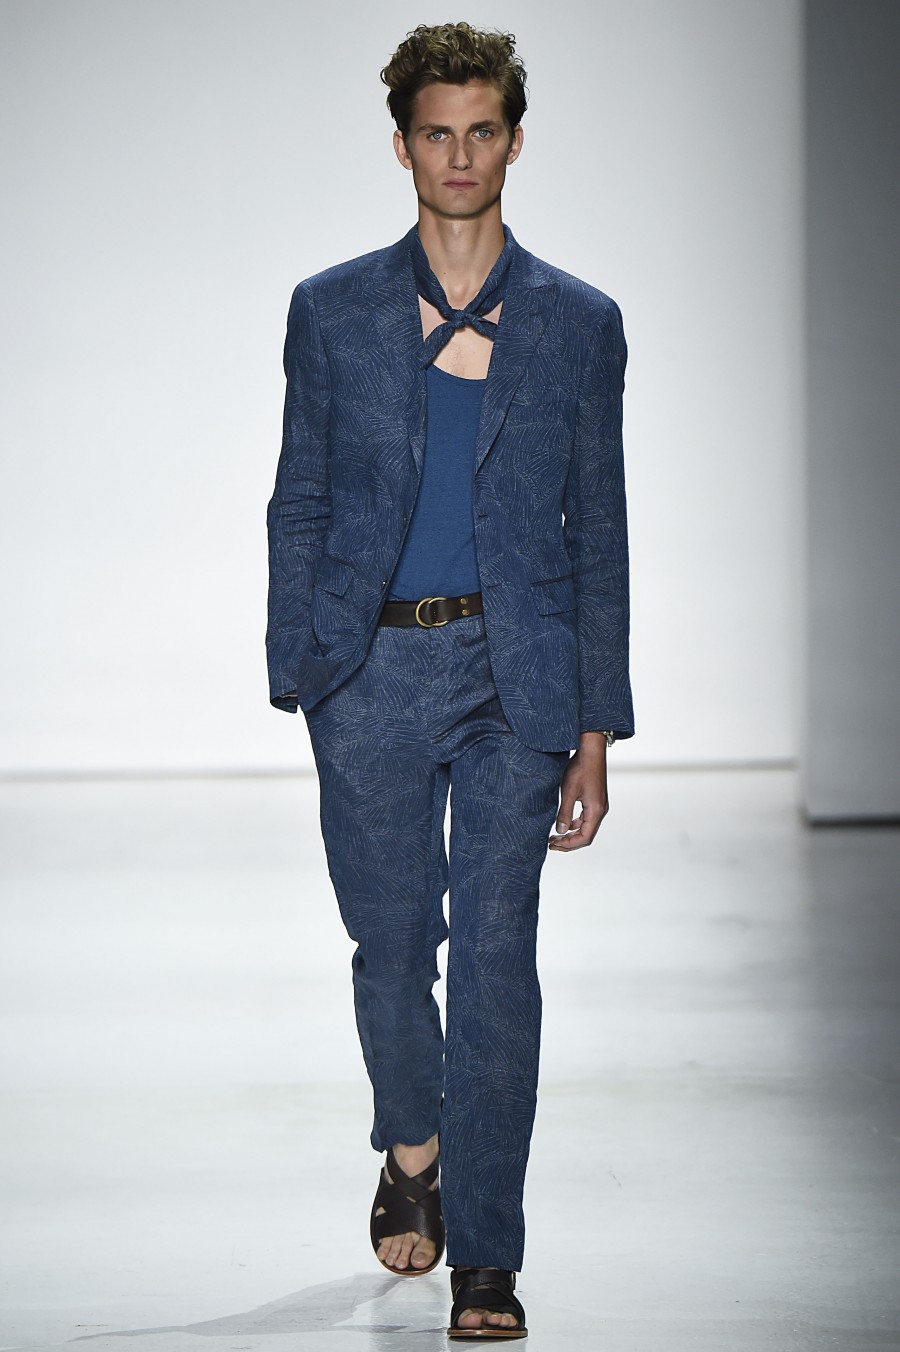 Todd Snyder's Spring 2016 Collection - Daily Front Row